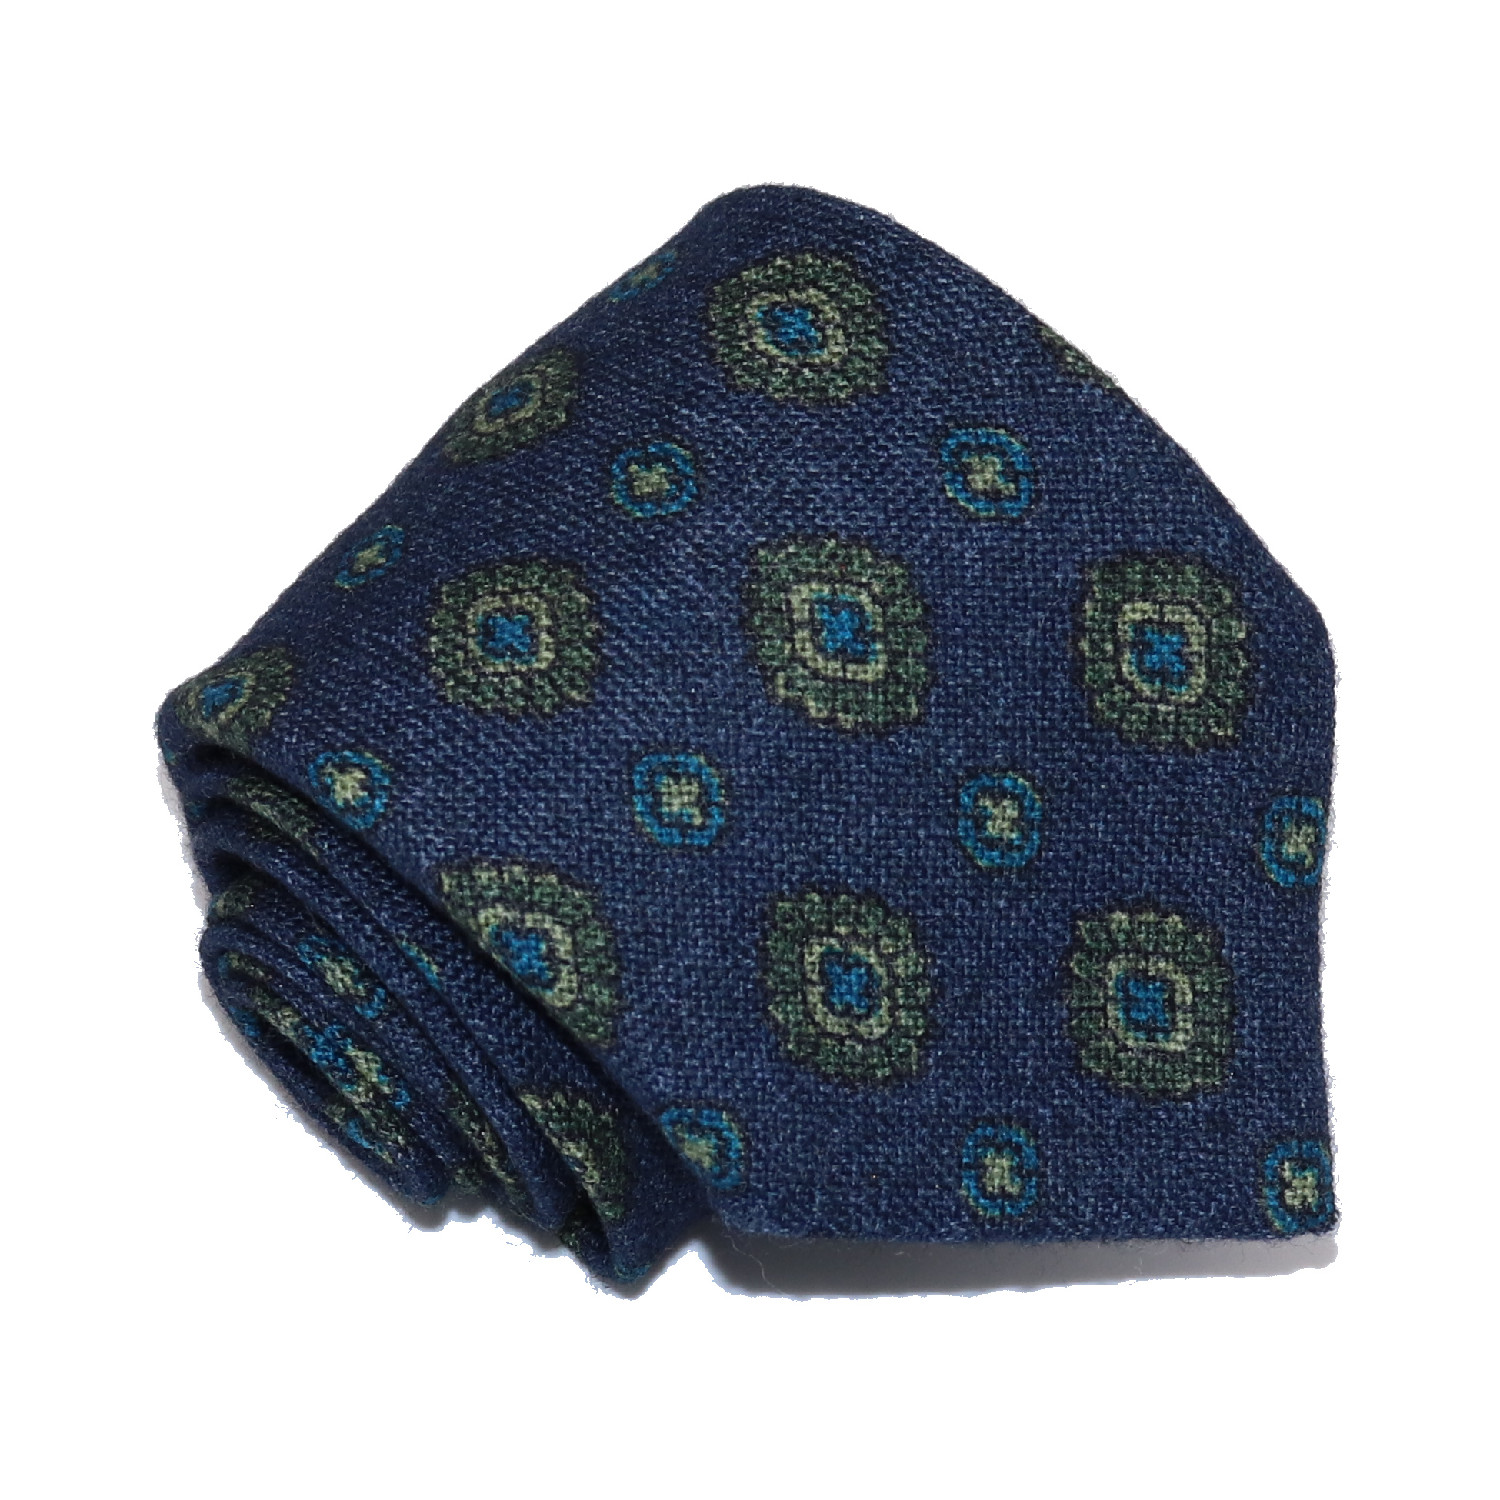 Refined 100% wool custom tie, navy blue and green medallions pattern ...